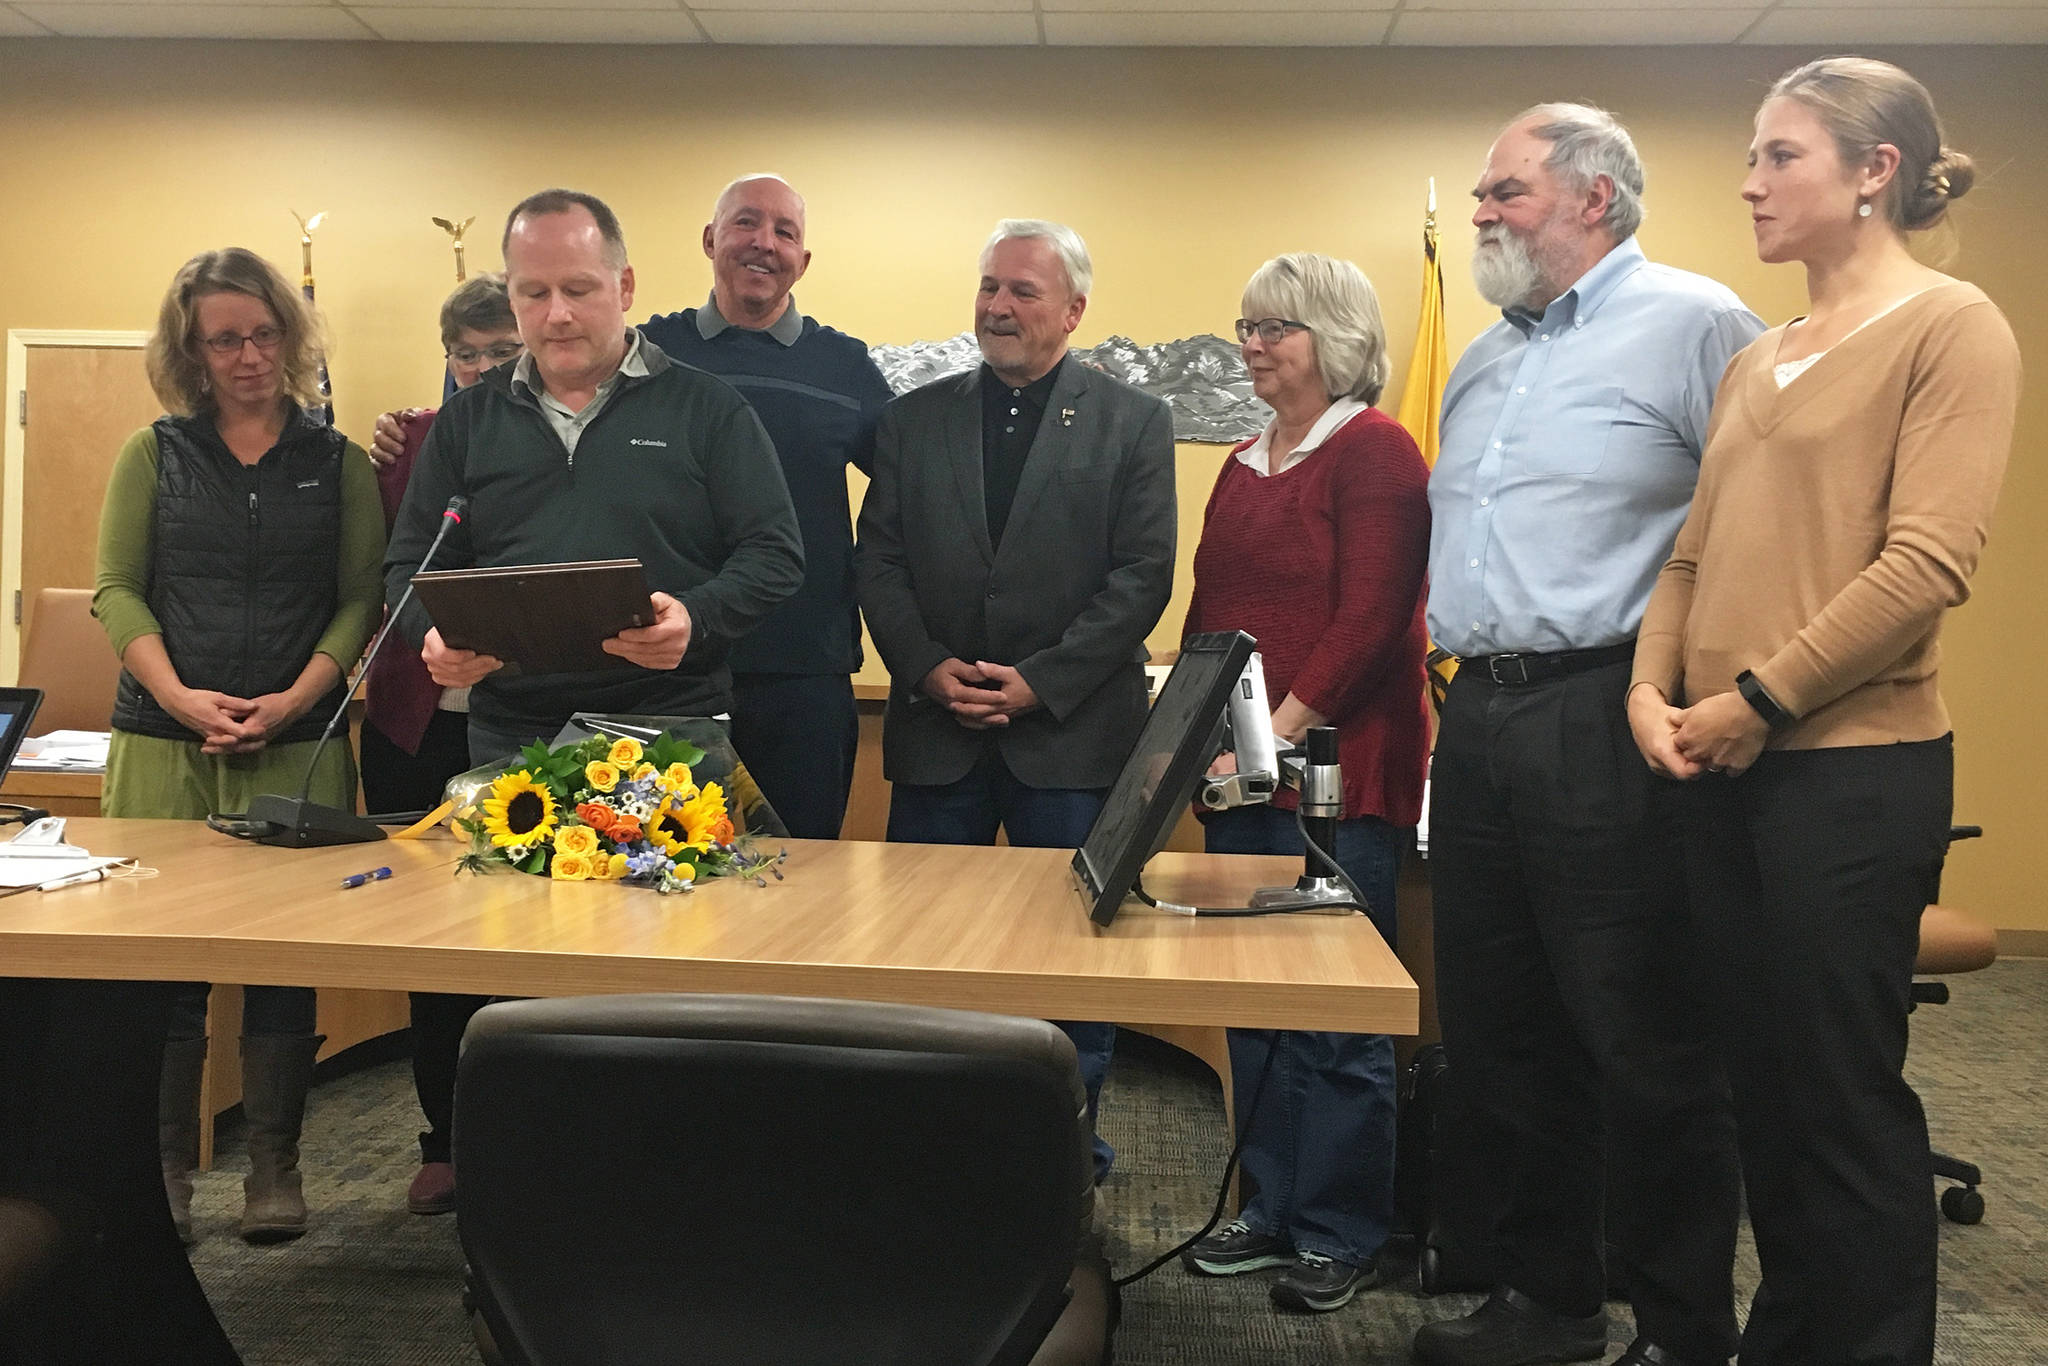 From left to right: Homer City Council members Rachel Lord, Caroline Venuti, Heath Smith, former Mayor Bryan Zak, council members Tom Stroozas and Shelly Erickson, Homer Mayor Ken Castner and City Manager Katie Koester celebrate an official recognition of Zak and his time serving the city during the council’s Monday, Nov. 26, 2018 meeting at Homer City Hall in Homer, Alaska. (Photo by Megan Pacer/Homer News)